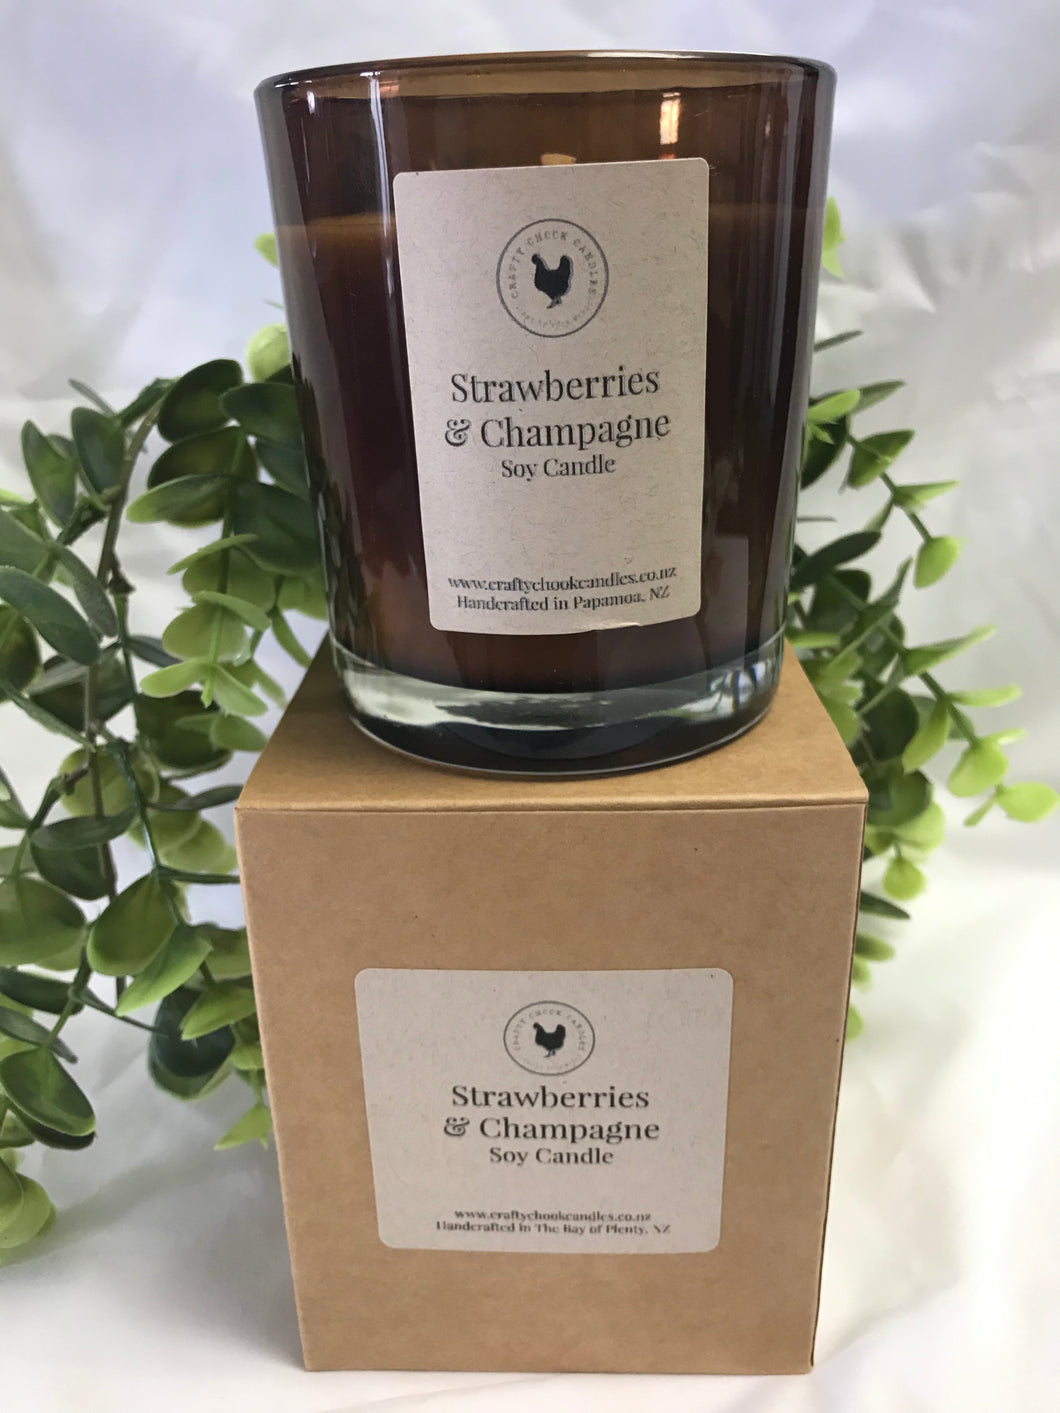 Strawberries & Champagne - Crafty Chook Candle